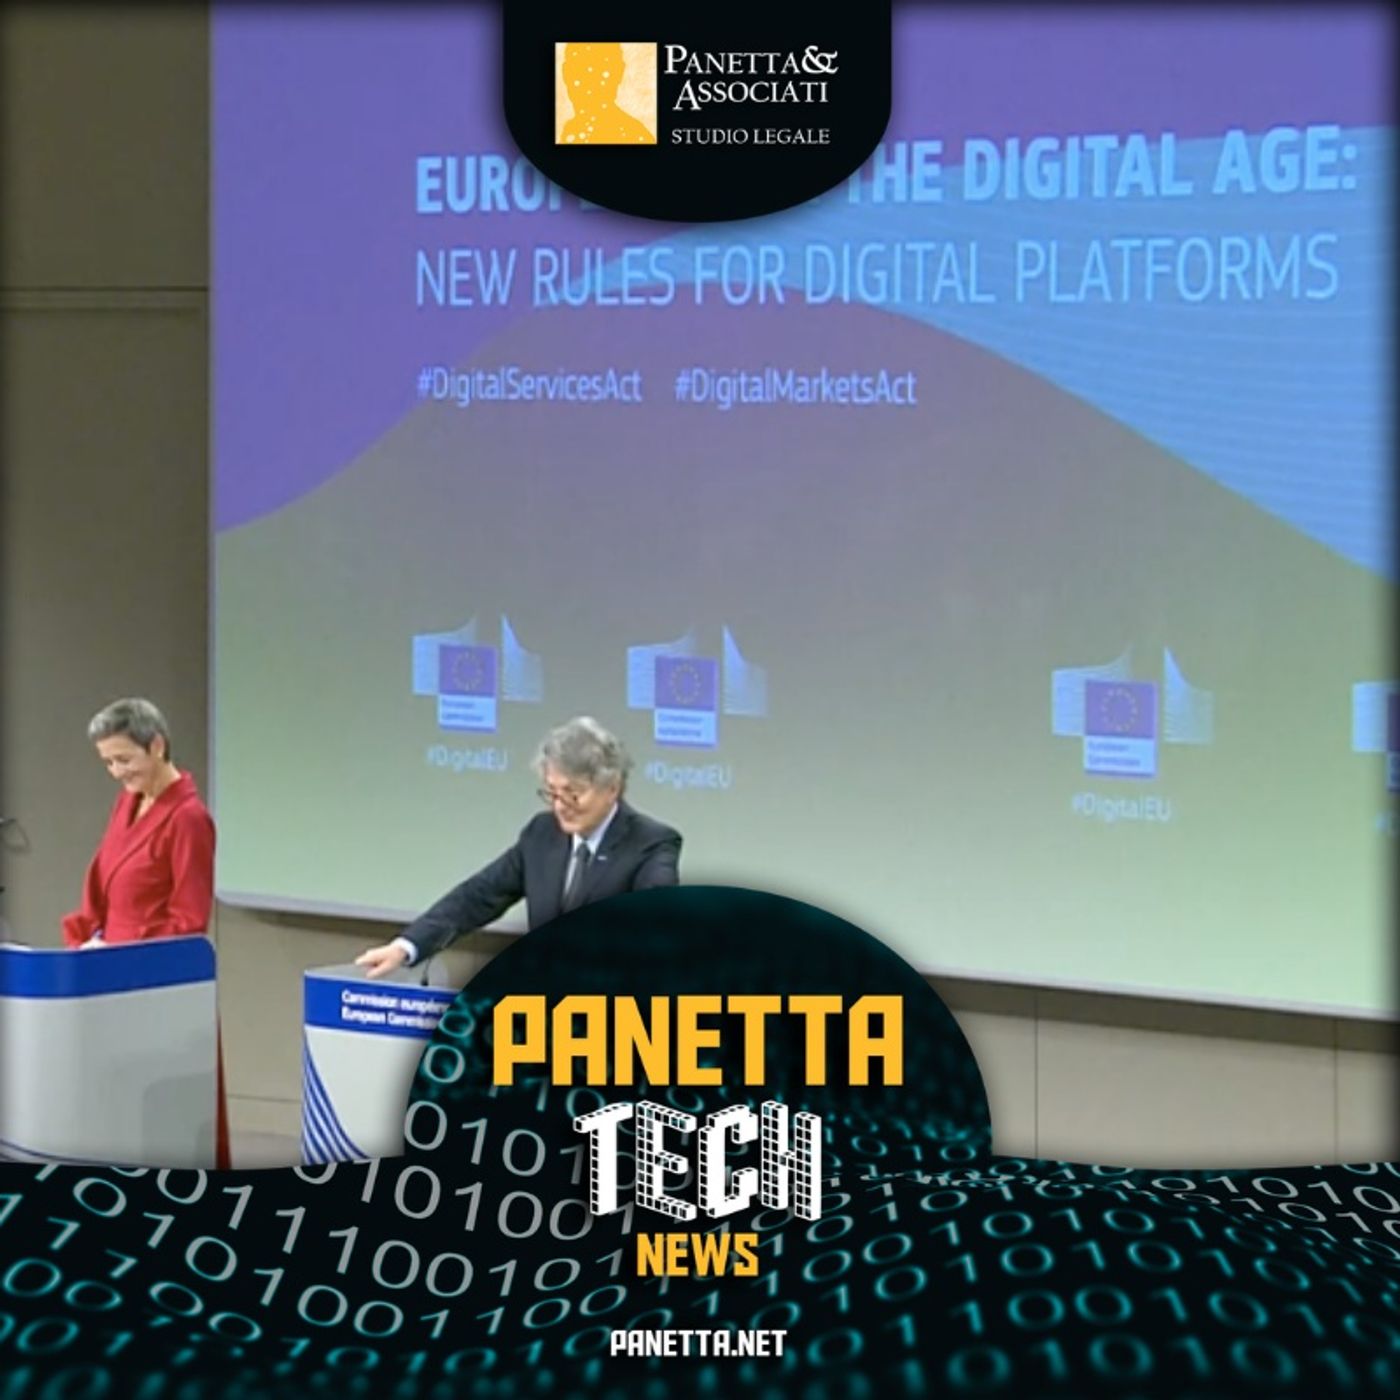 1. Panetta Paper EU: the proposal for a European Digital Services Act